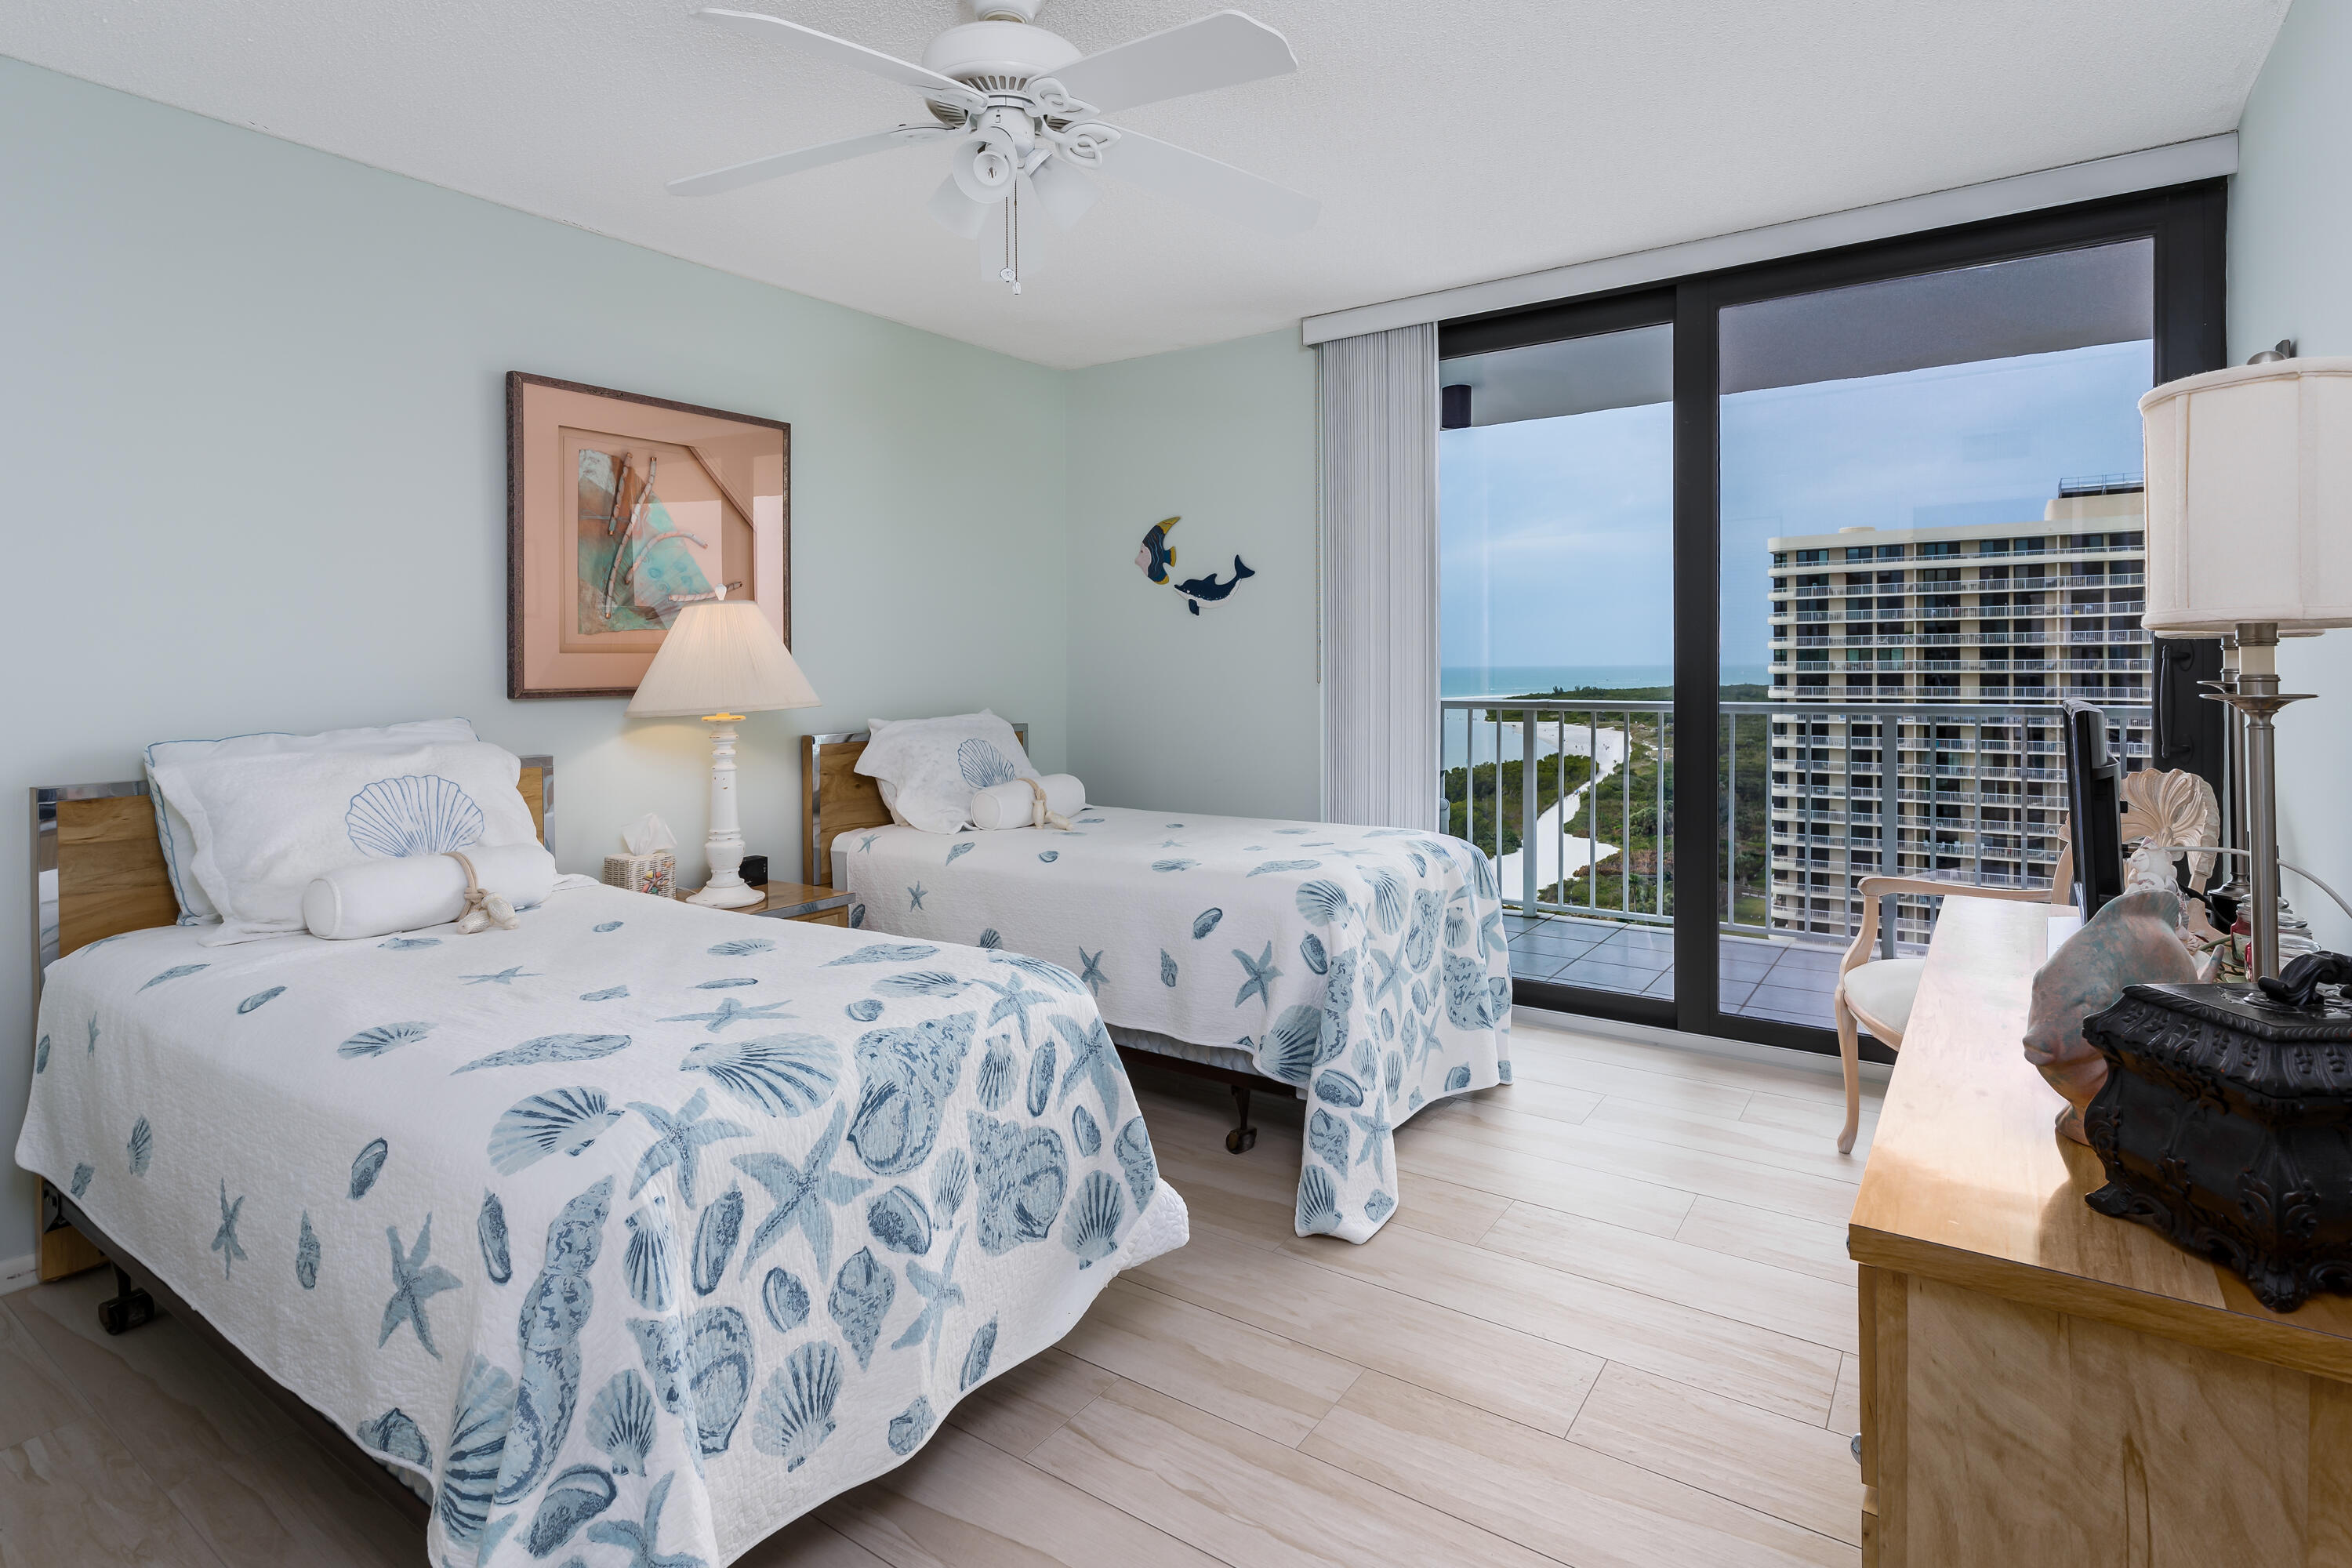 320 Seaview Ct Unit 1512, Marco Island, Florida, 34145, United States, 2 Bedrooms Bedrooms, ,2 BathroomsBathrooms,Residential,For Sale,320 Seaview Ct Unit 1512,1476618